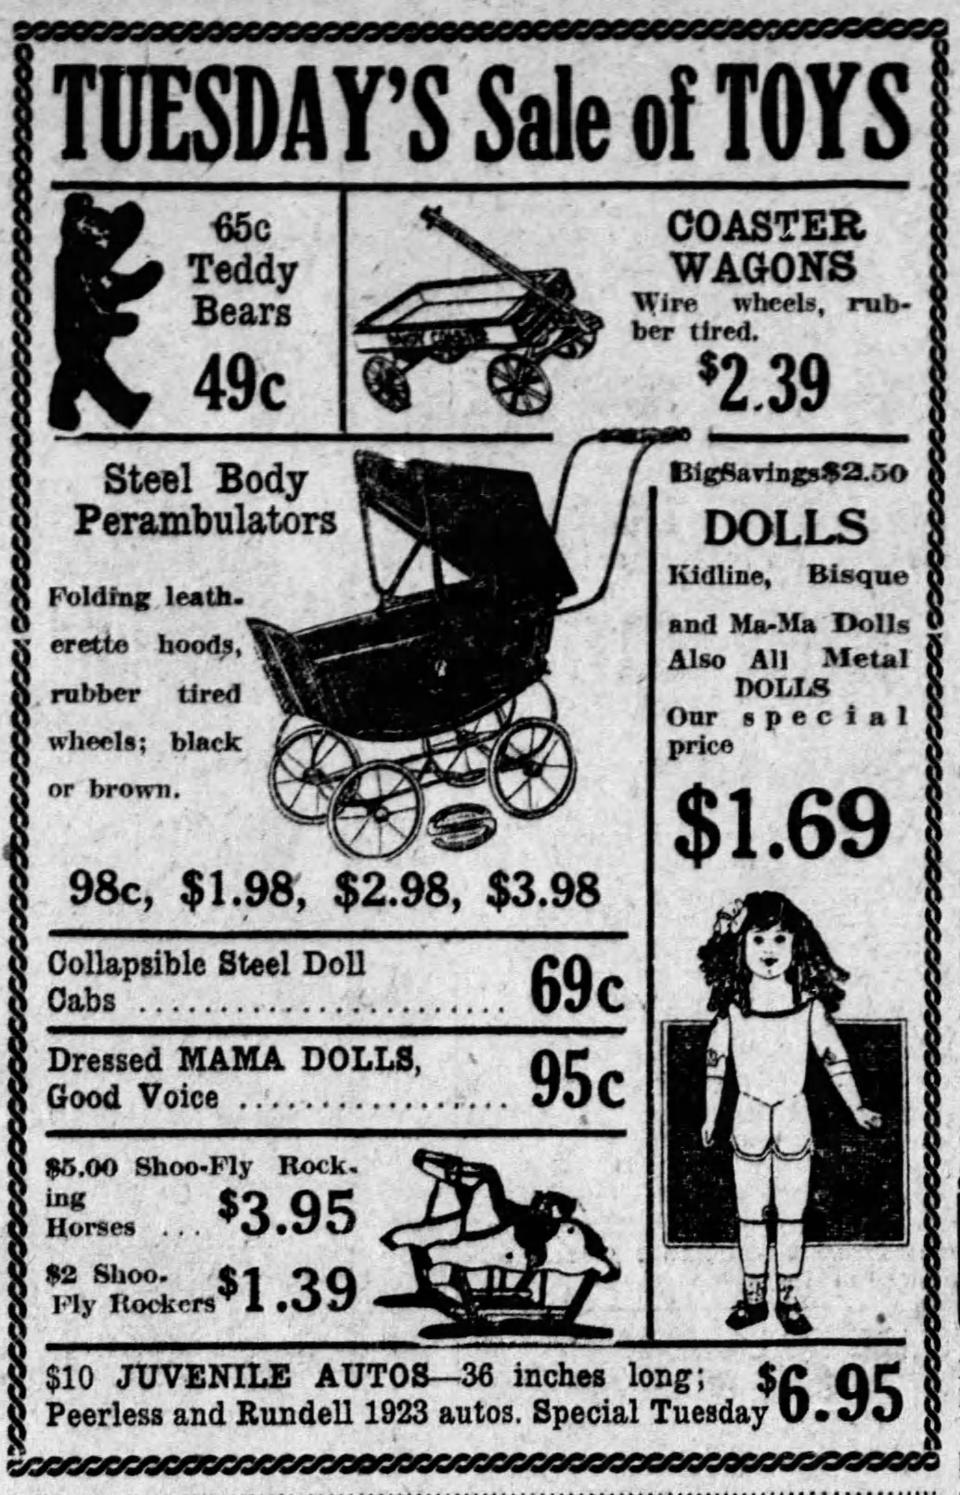 Federman’s department store in downtown Akron advertises Christmas toys in December 1922.